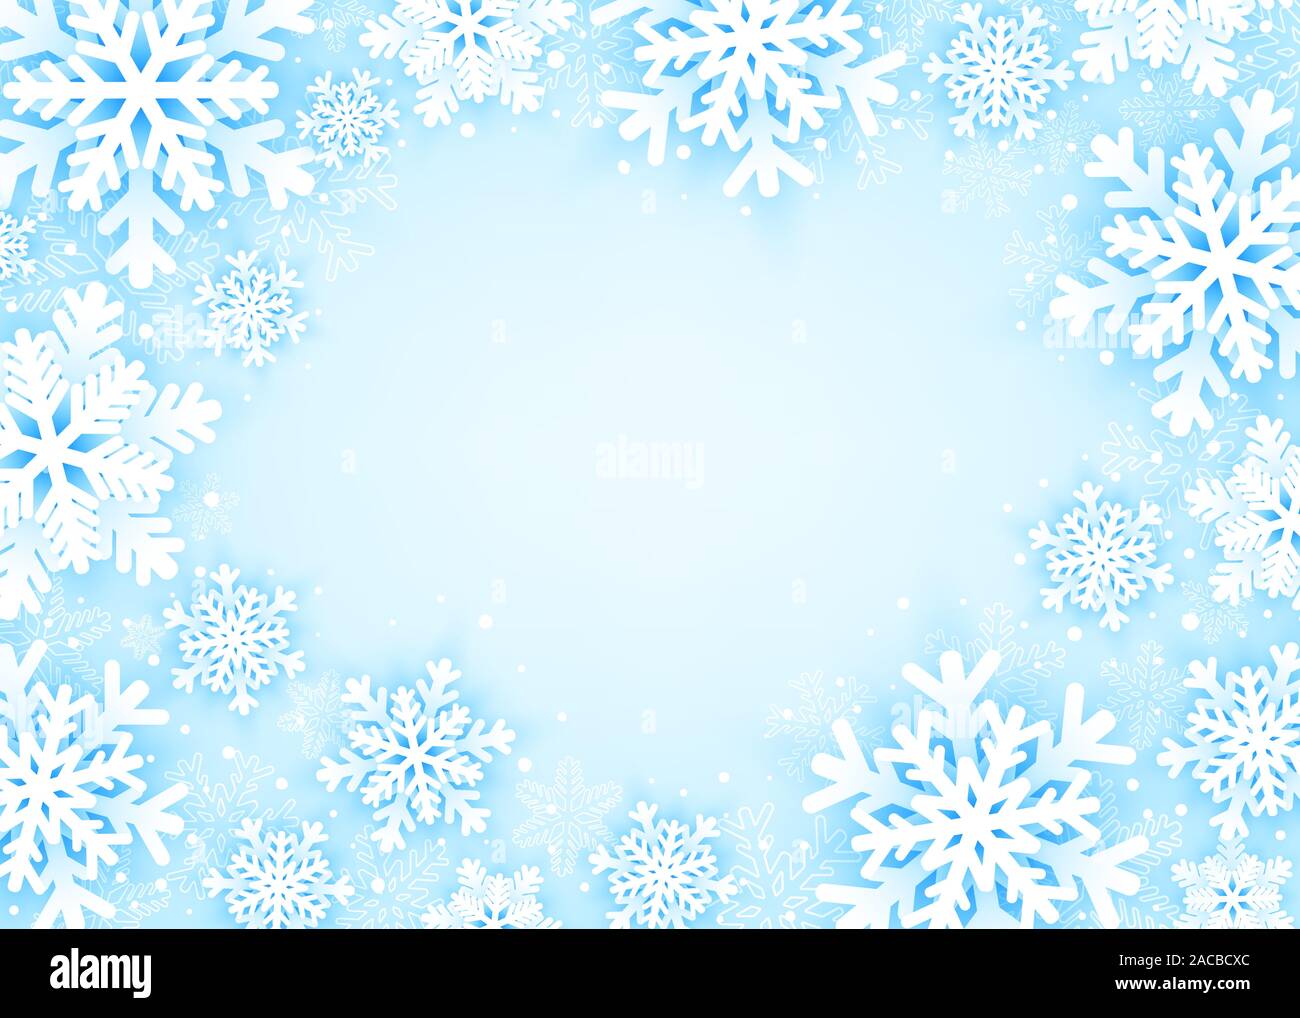 Merry Christmas and Happy New Year greeting card with snowflakes on blue background. Vector illustration Stock Vector